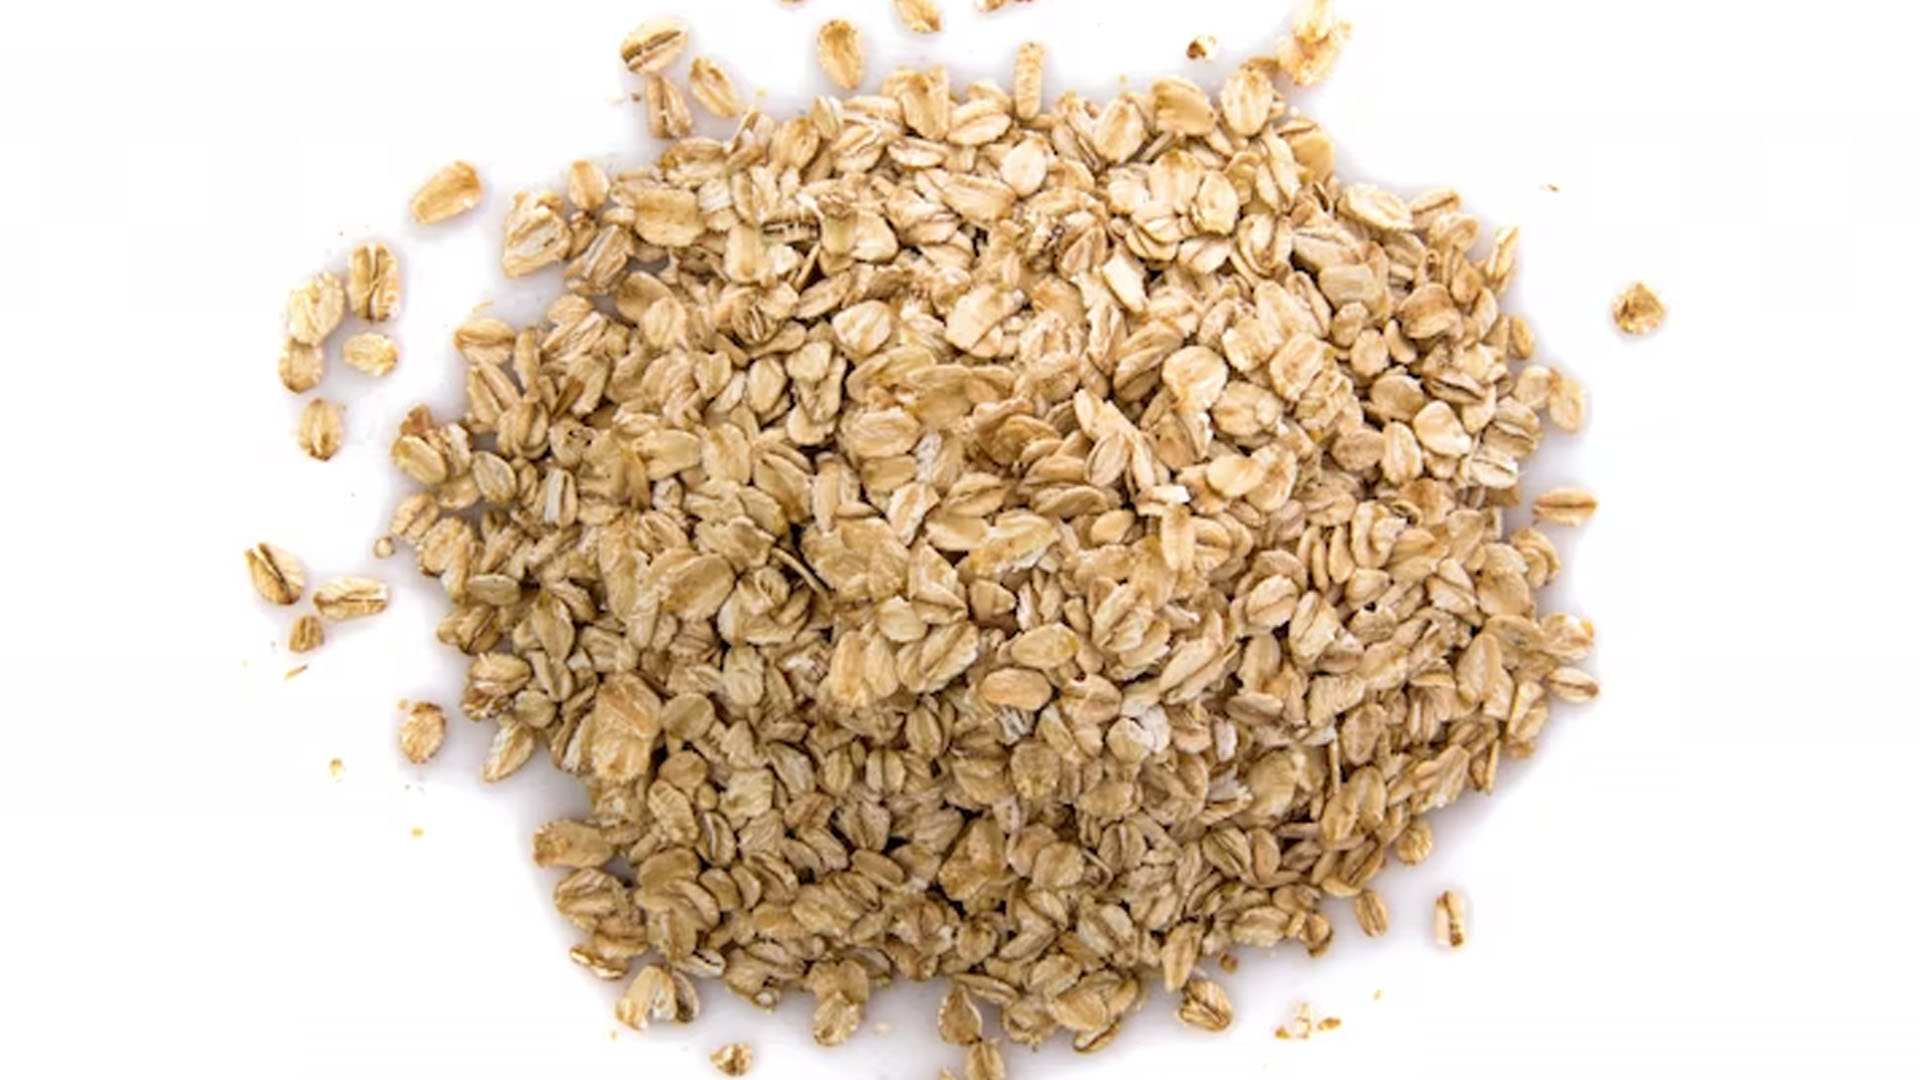 What Are The Health Benefits of Oat Bran?